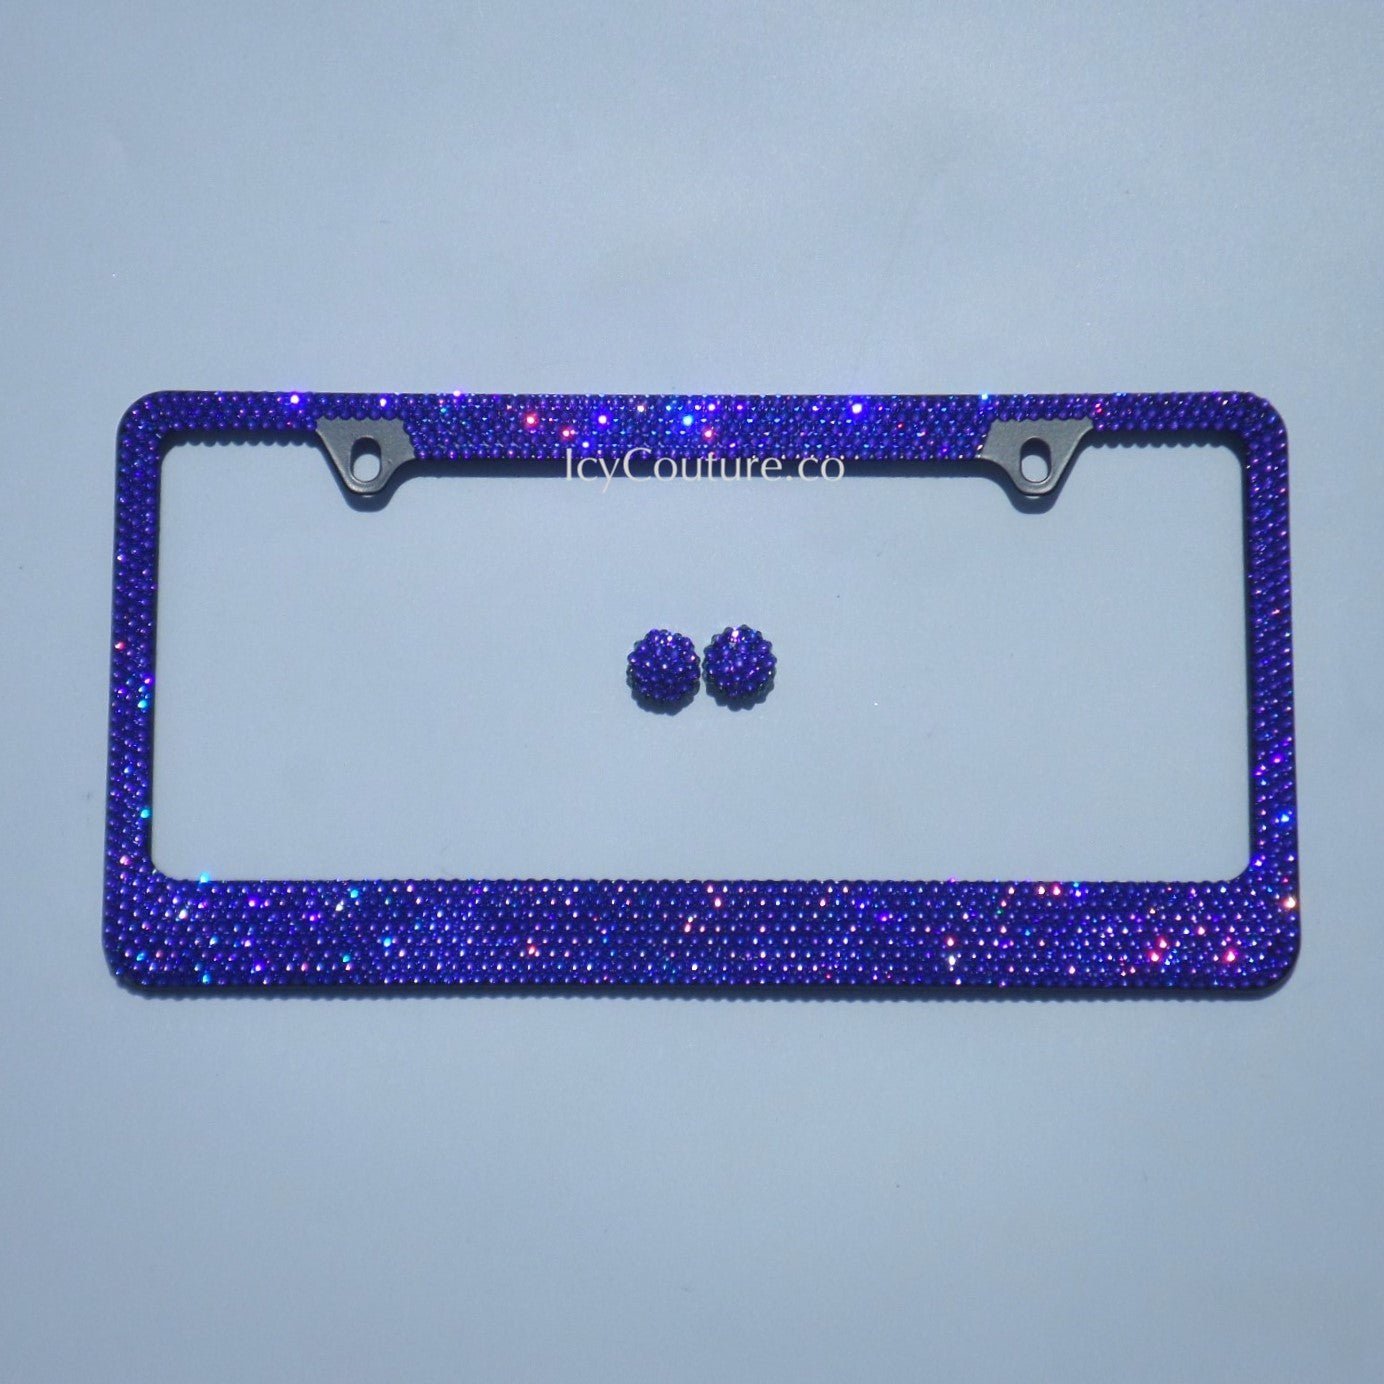 Purple Heliotrope  Swarovski Crystals Bling License Plate Frame, Crystallized by ICY Couture